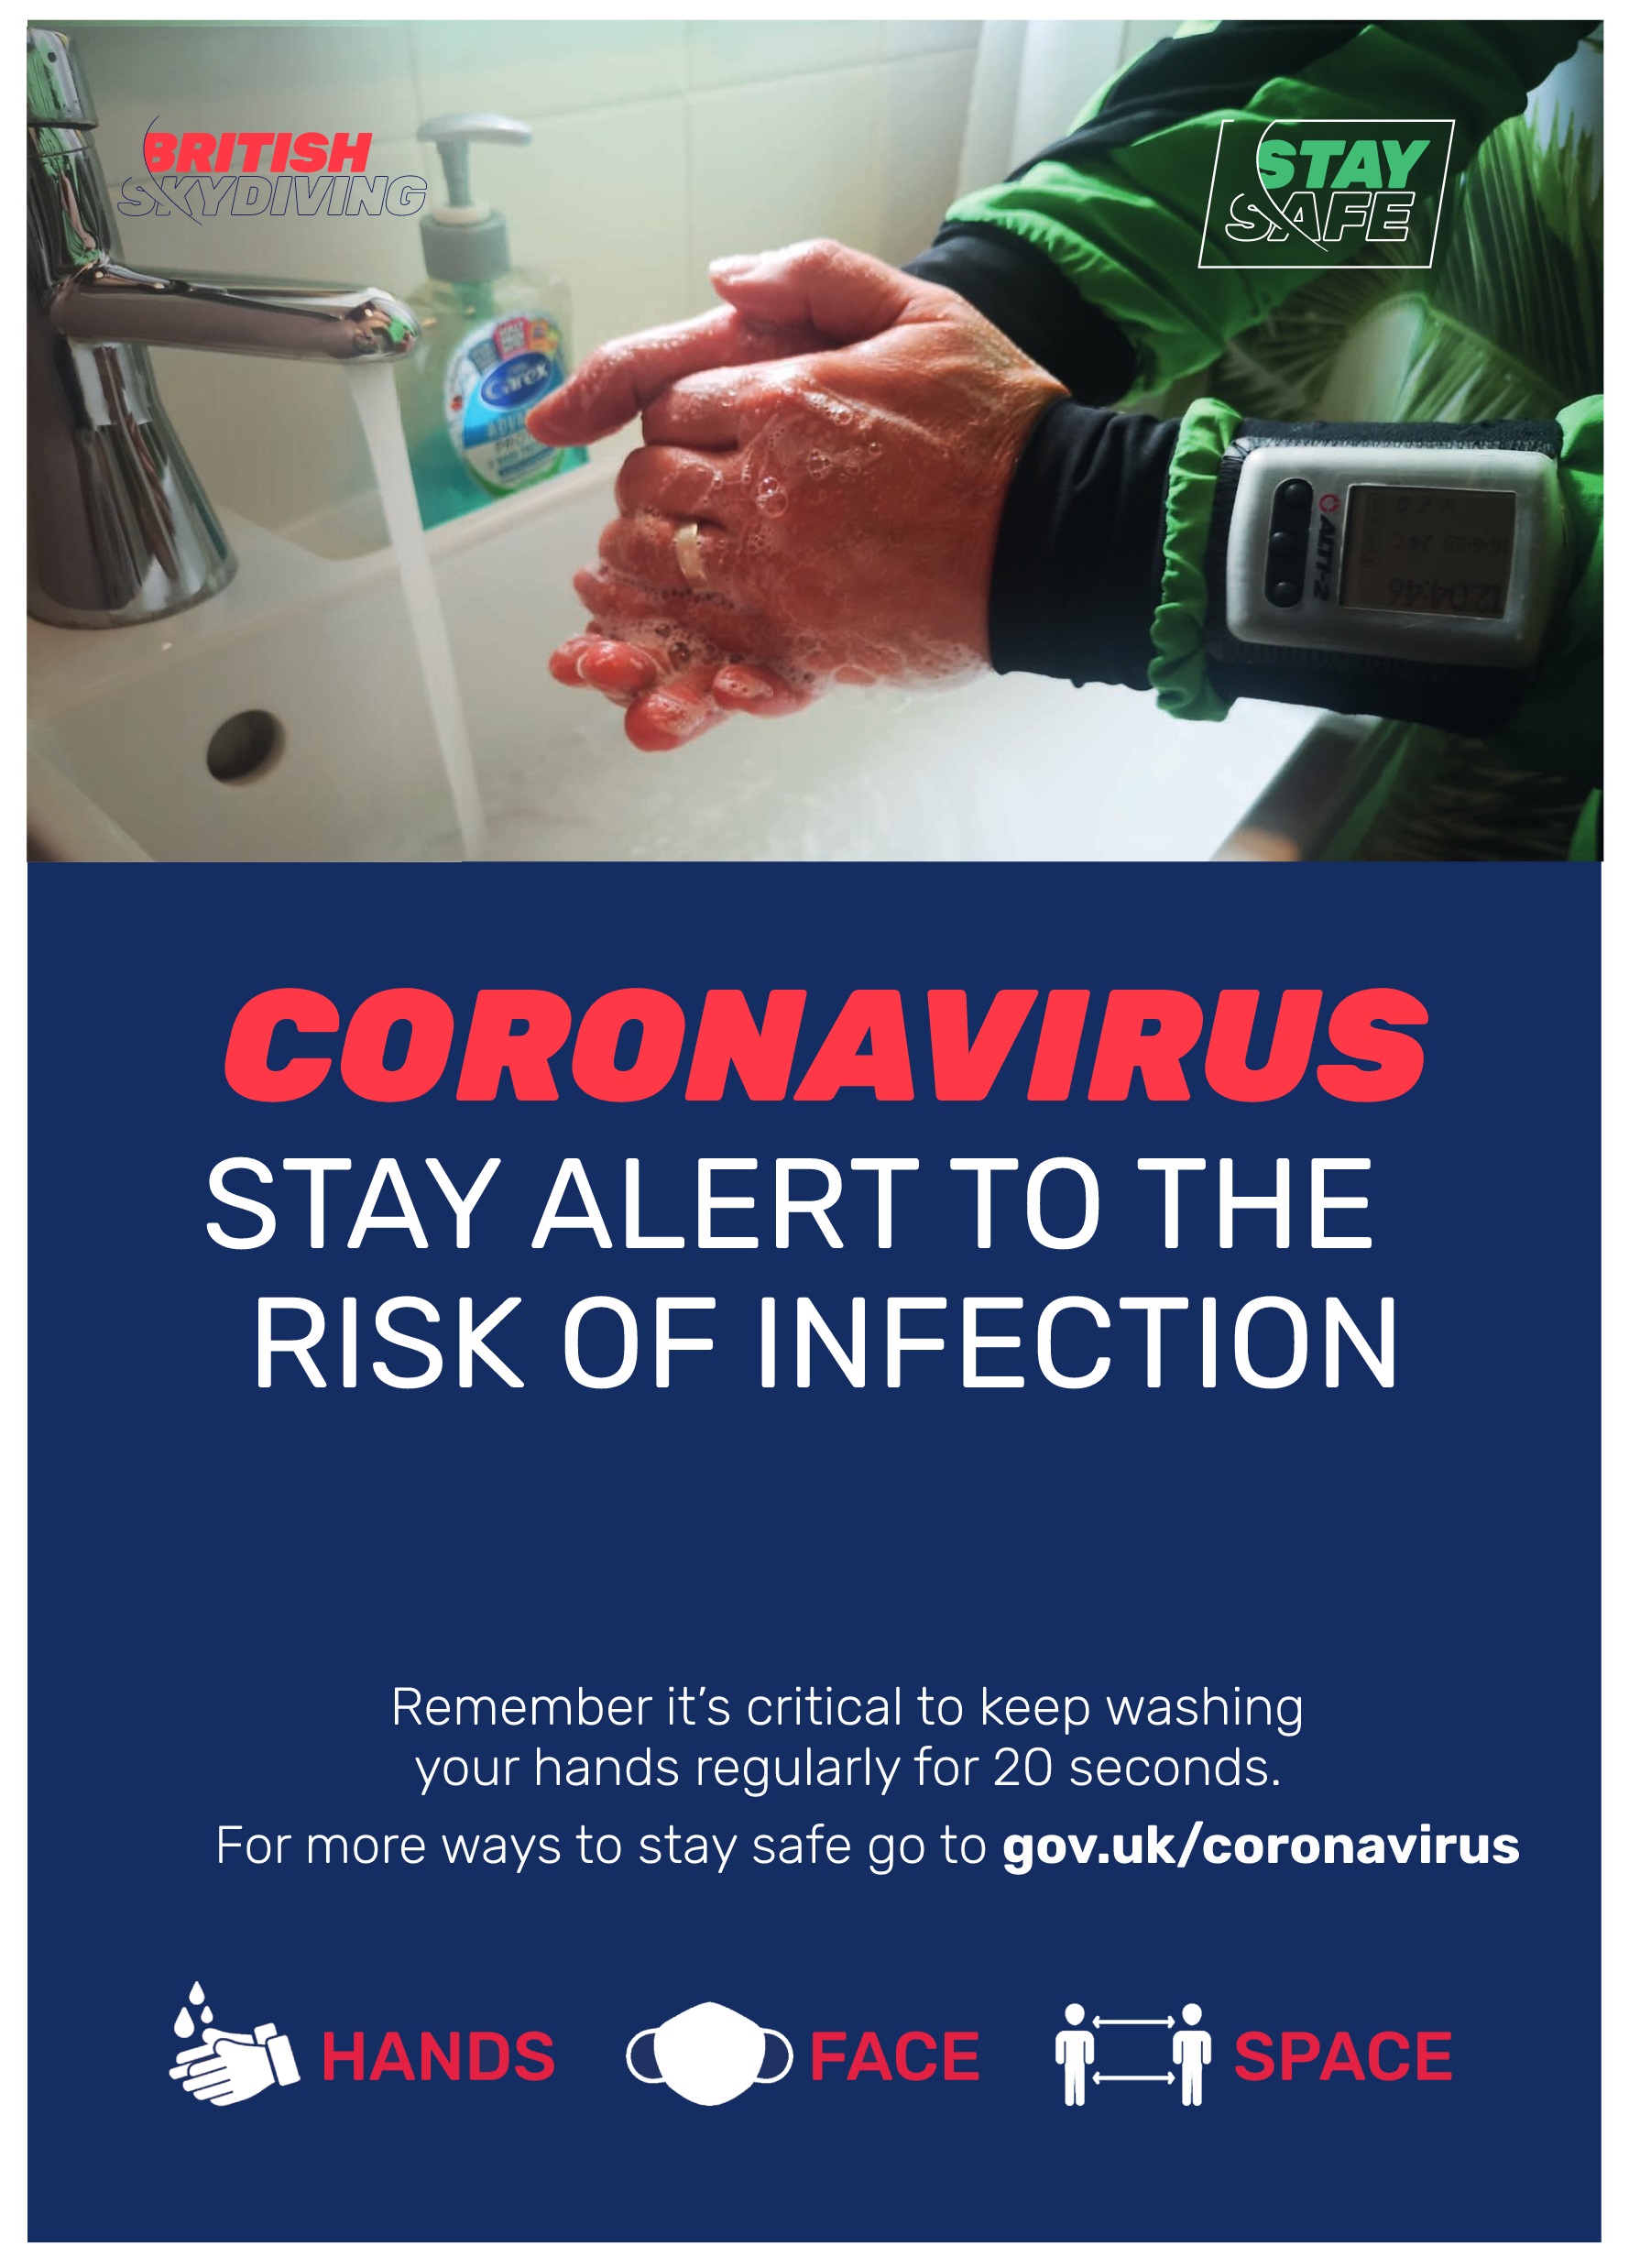 British-Skydiving-StayAlert-Hygiene-A3-Poster-updated